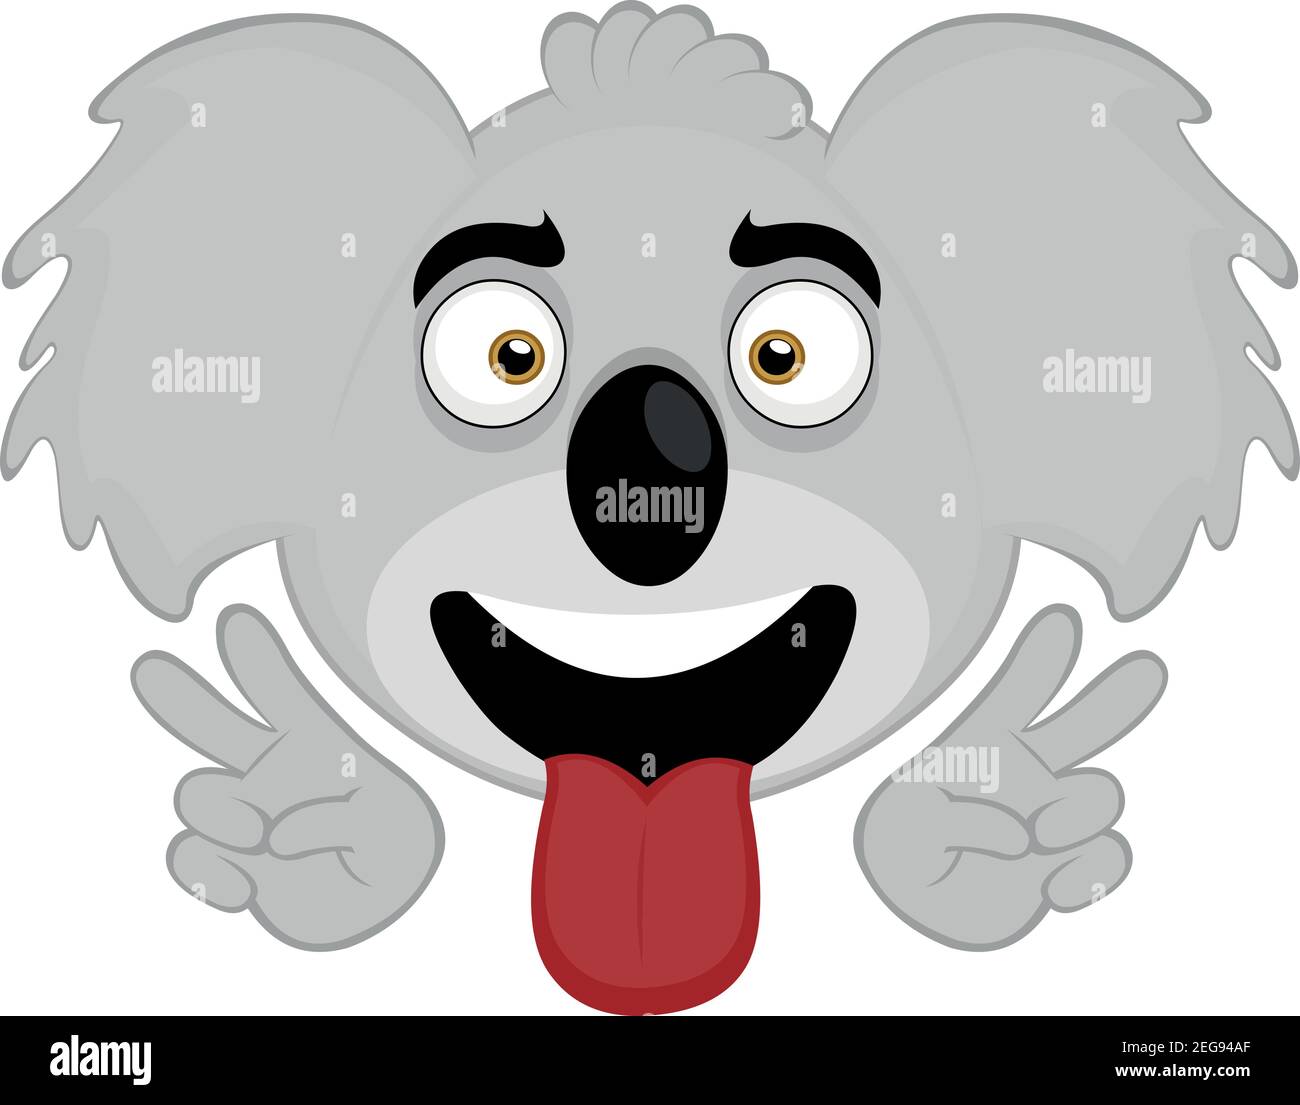 Vector emoticon  illustration cartoon of a koala's head with a happy expression and a gesture of his hands making a peace sign Stock Vector